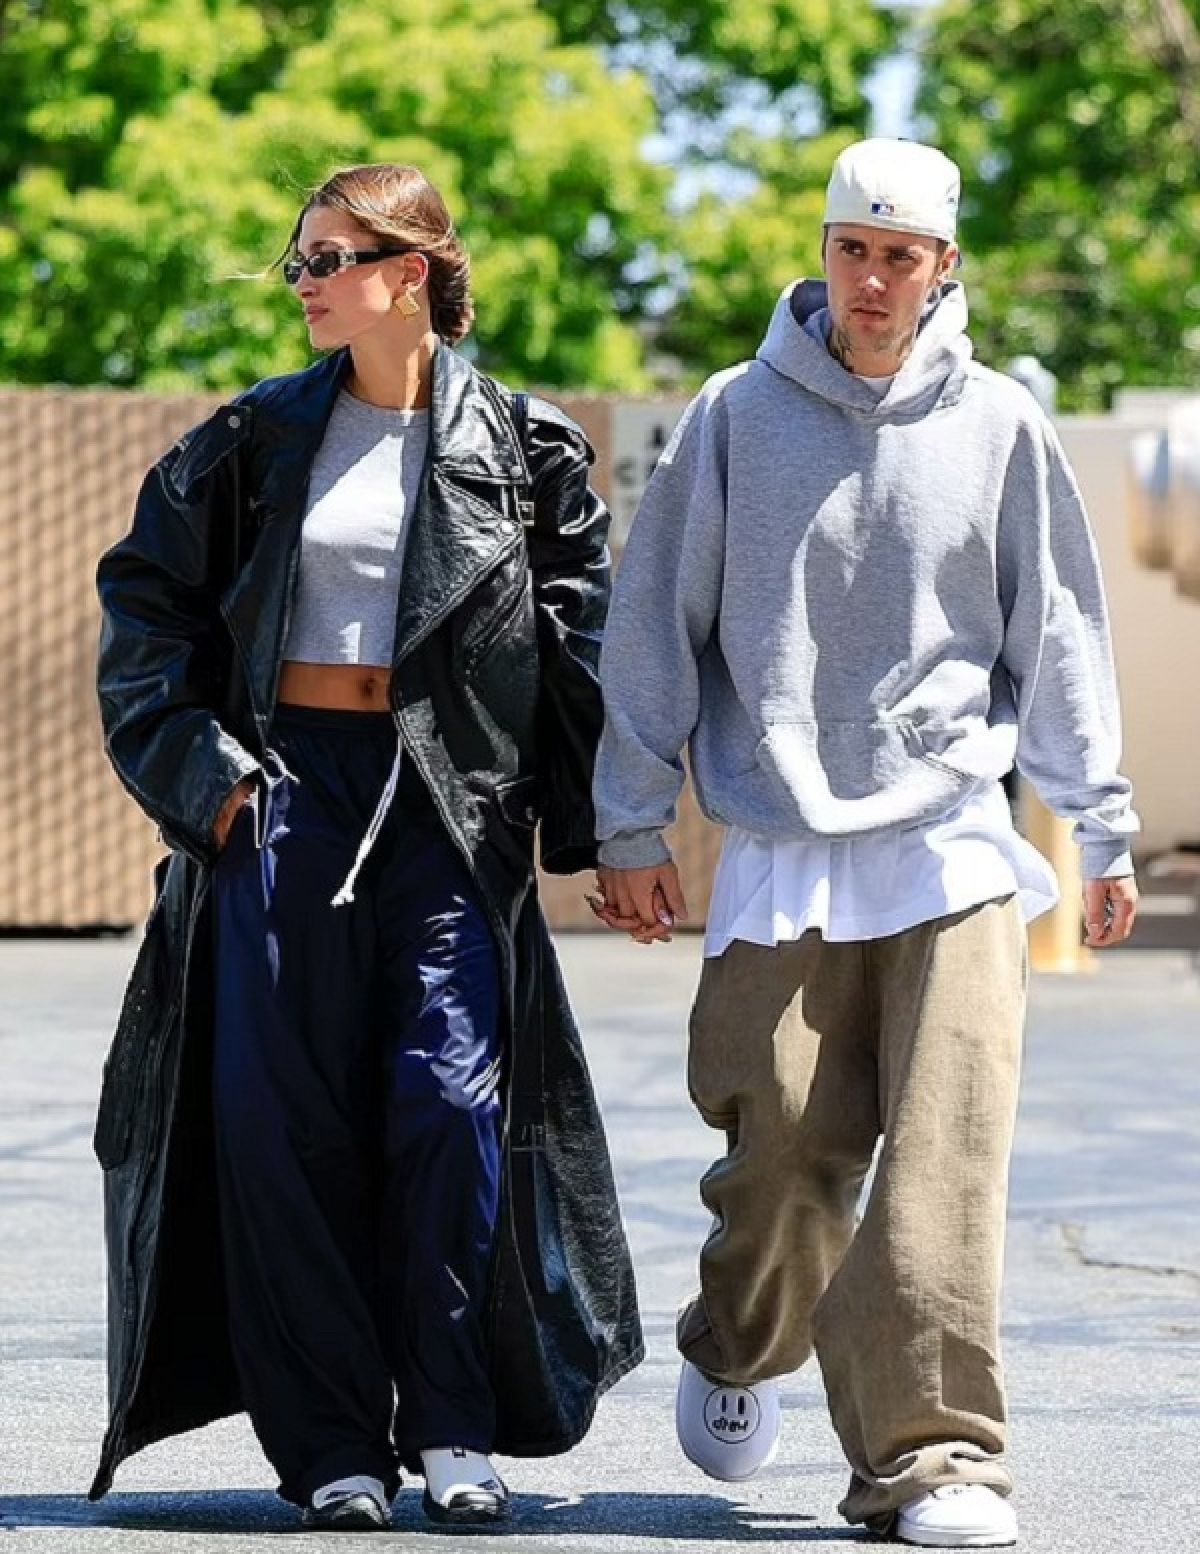 Justin Bieber seen with his wife holding hands